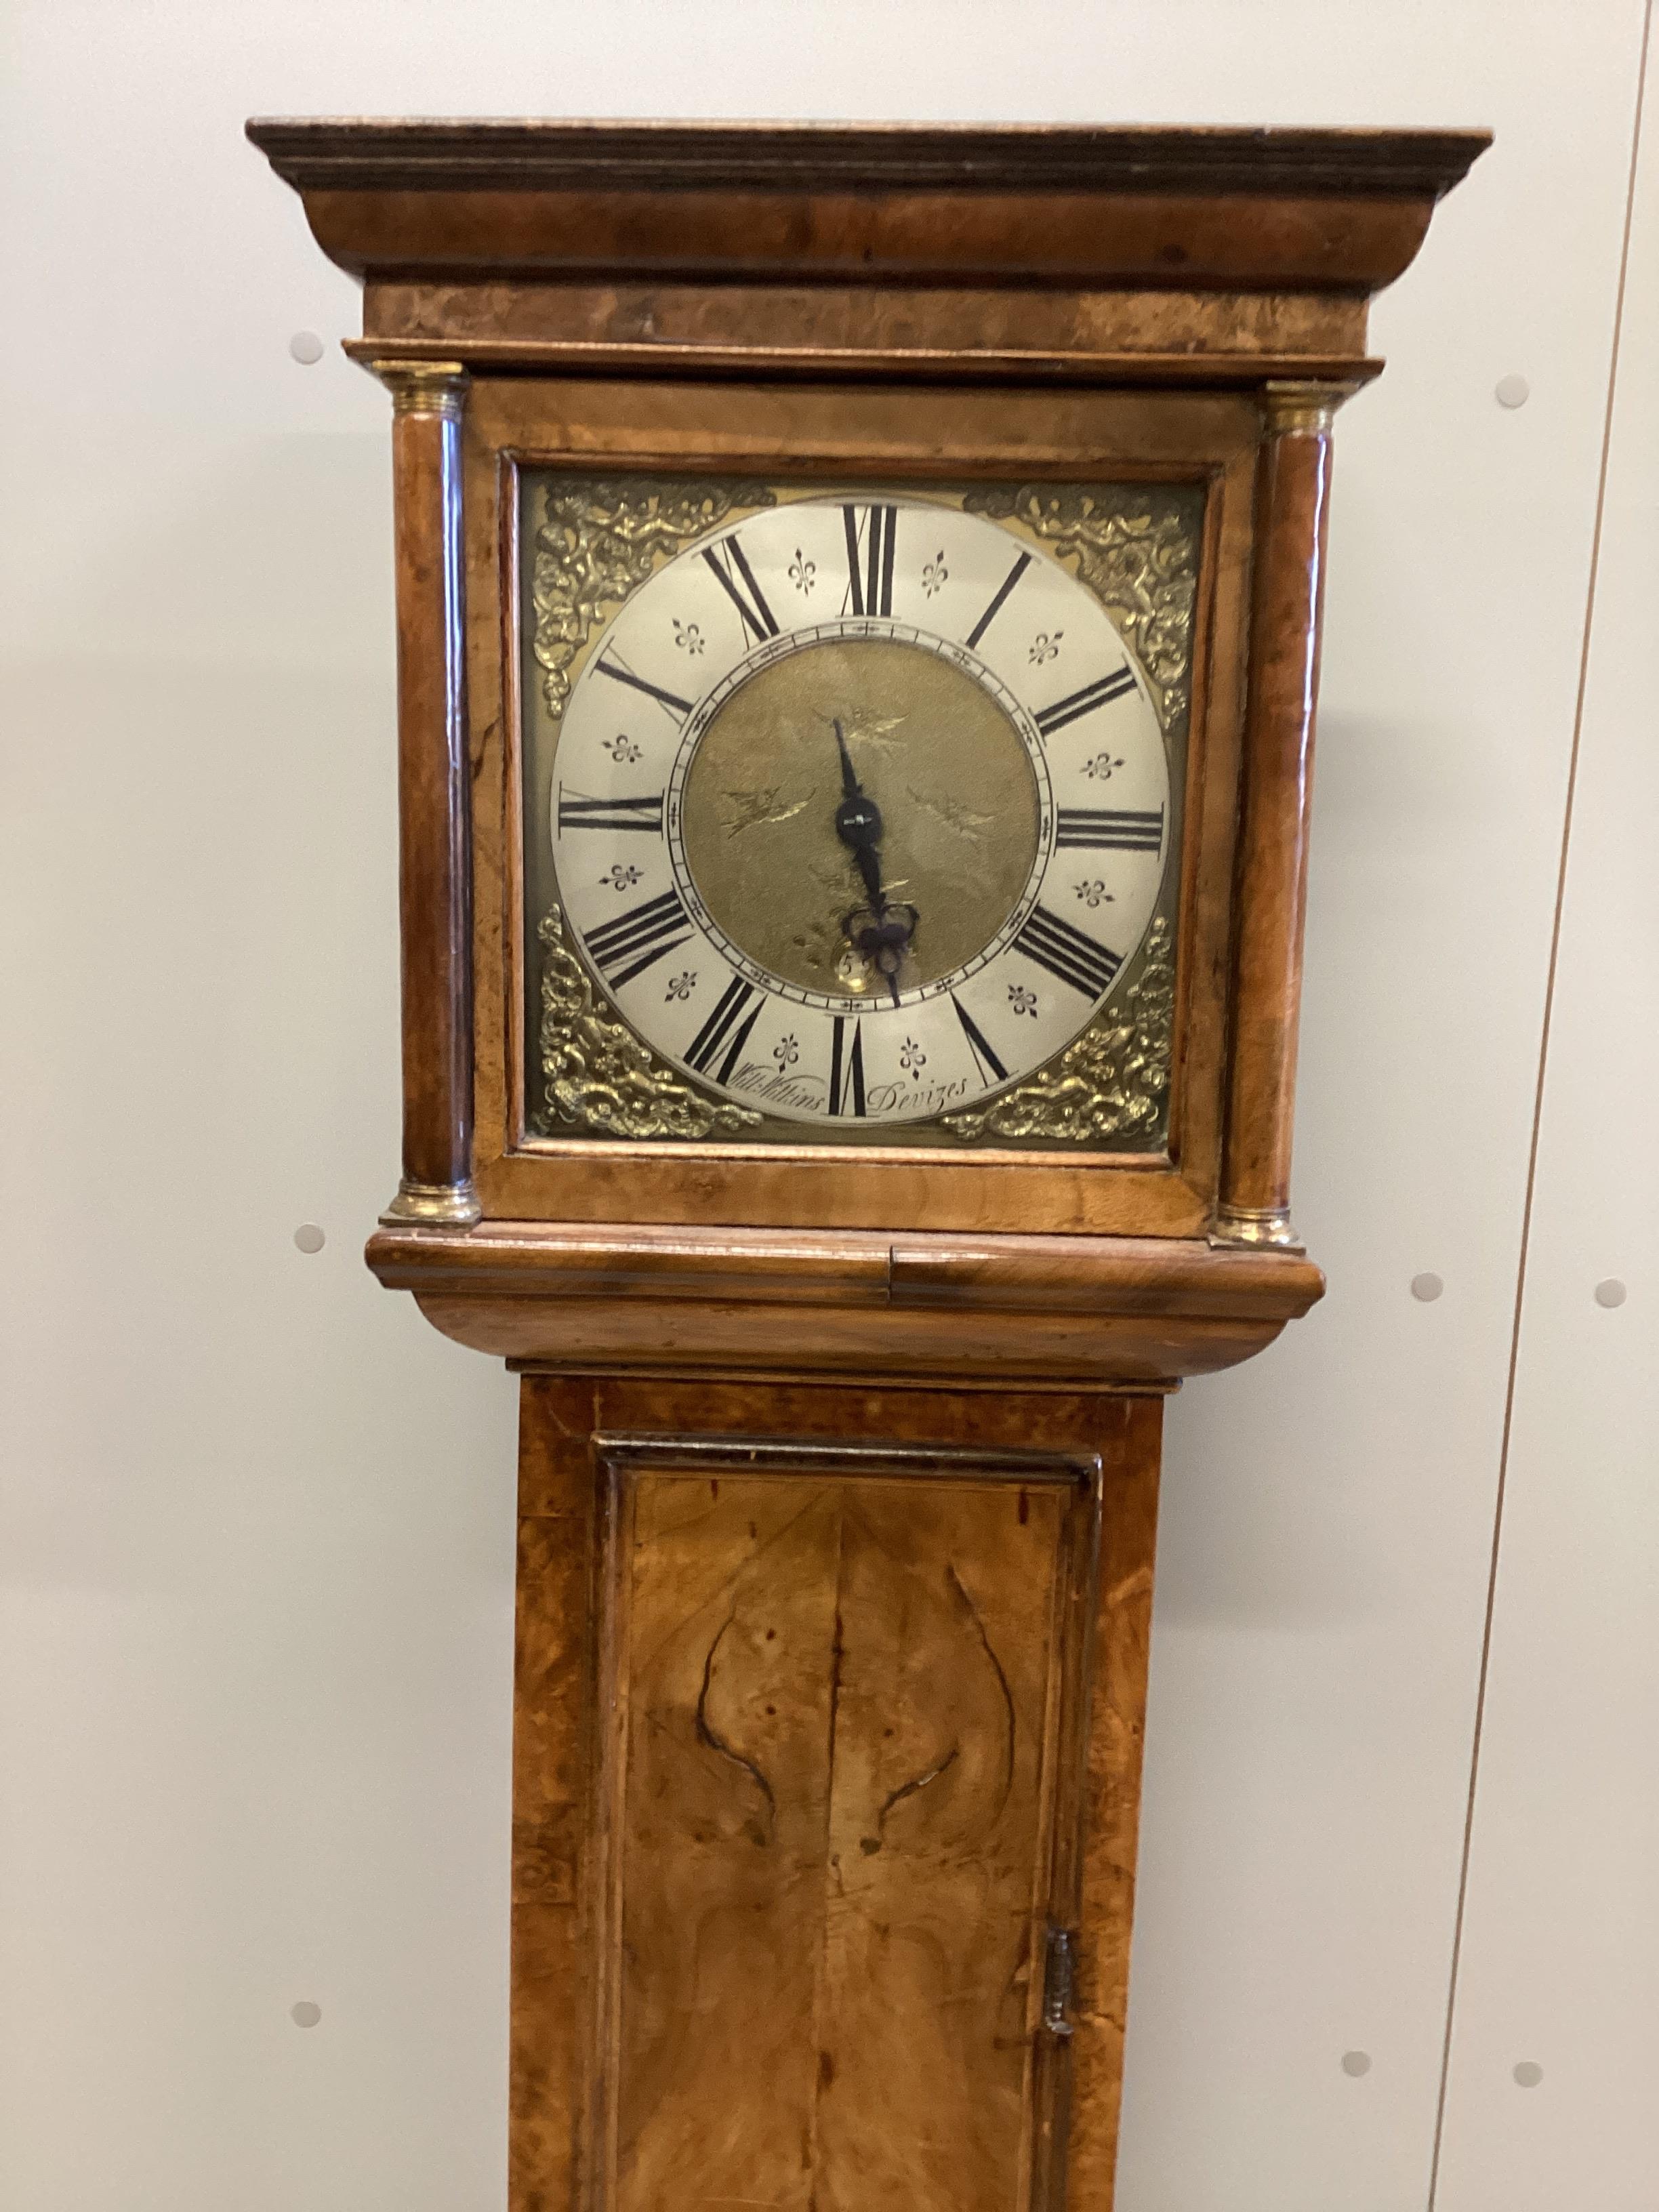 William Wilkins, Devizes. An 18th century 10 inch thirty hour longcase clock dial with date aperture, later figured walnut case height 178cm.                                                                               